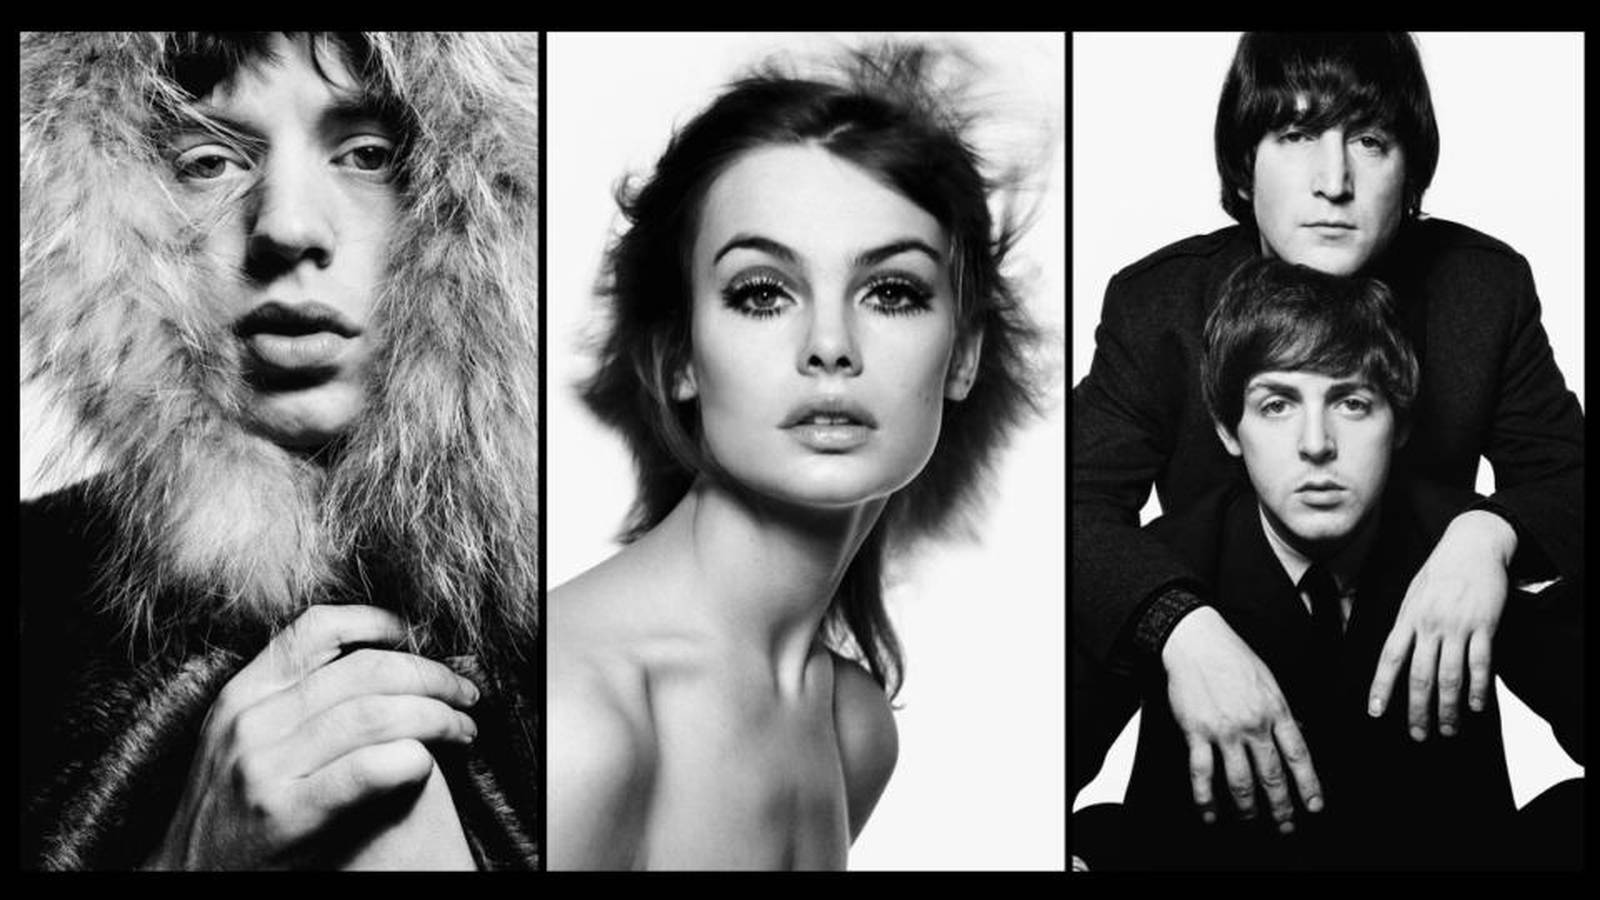 David Bailey didn't just capture the Swinging Sixties, he defined 